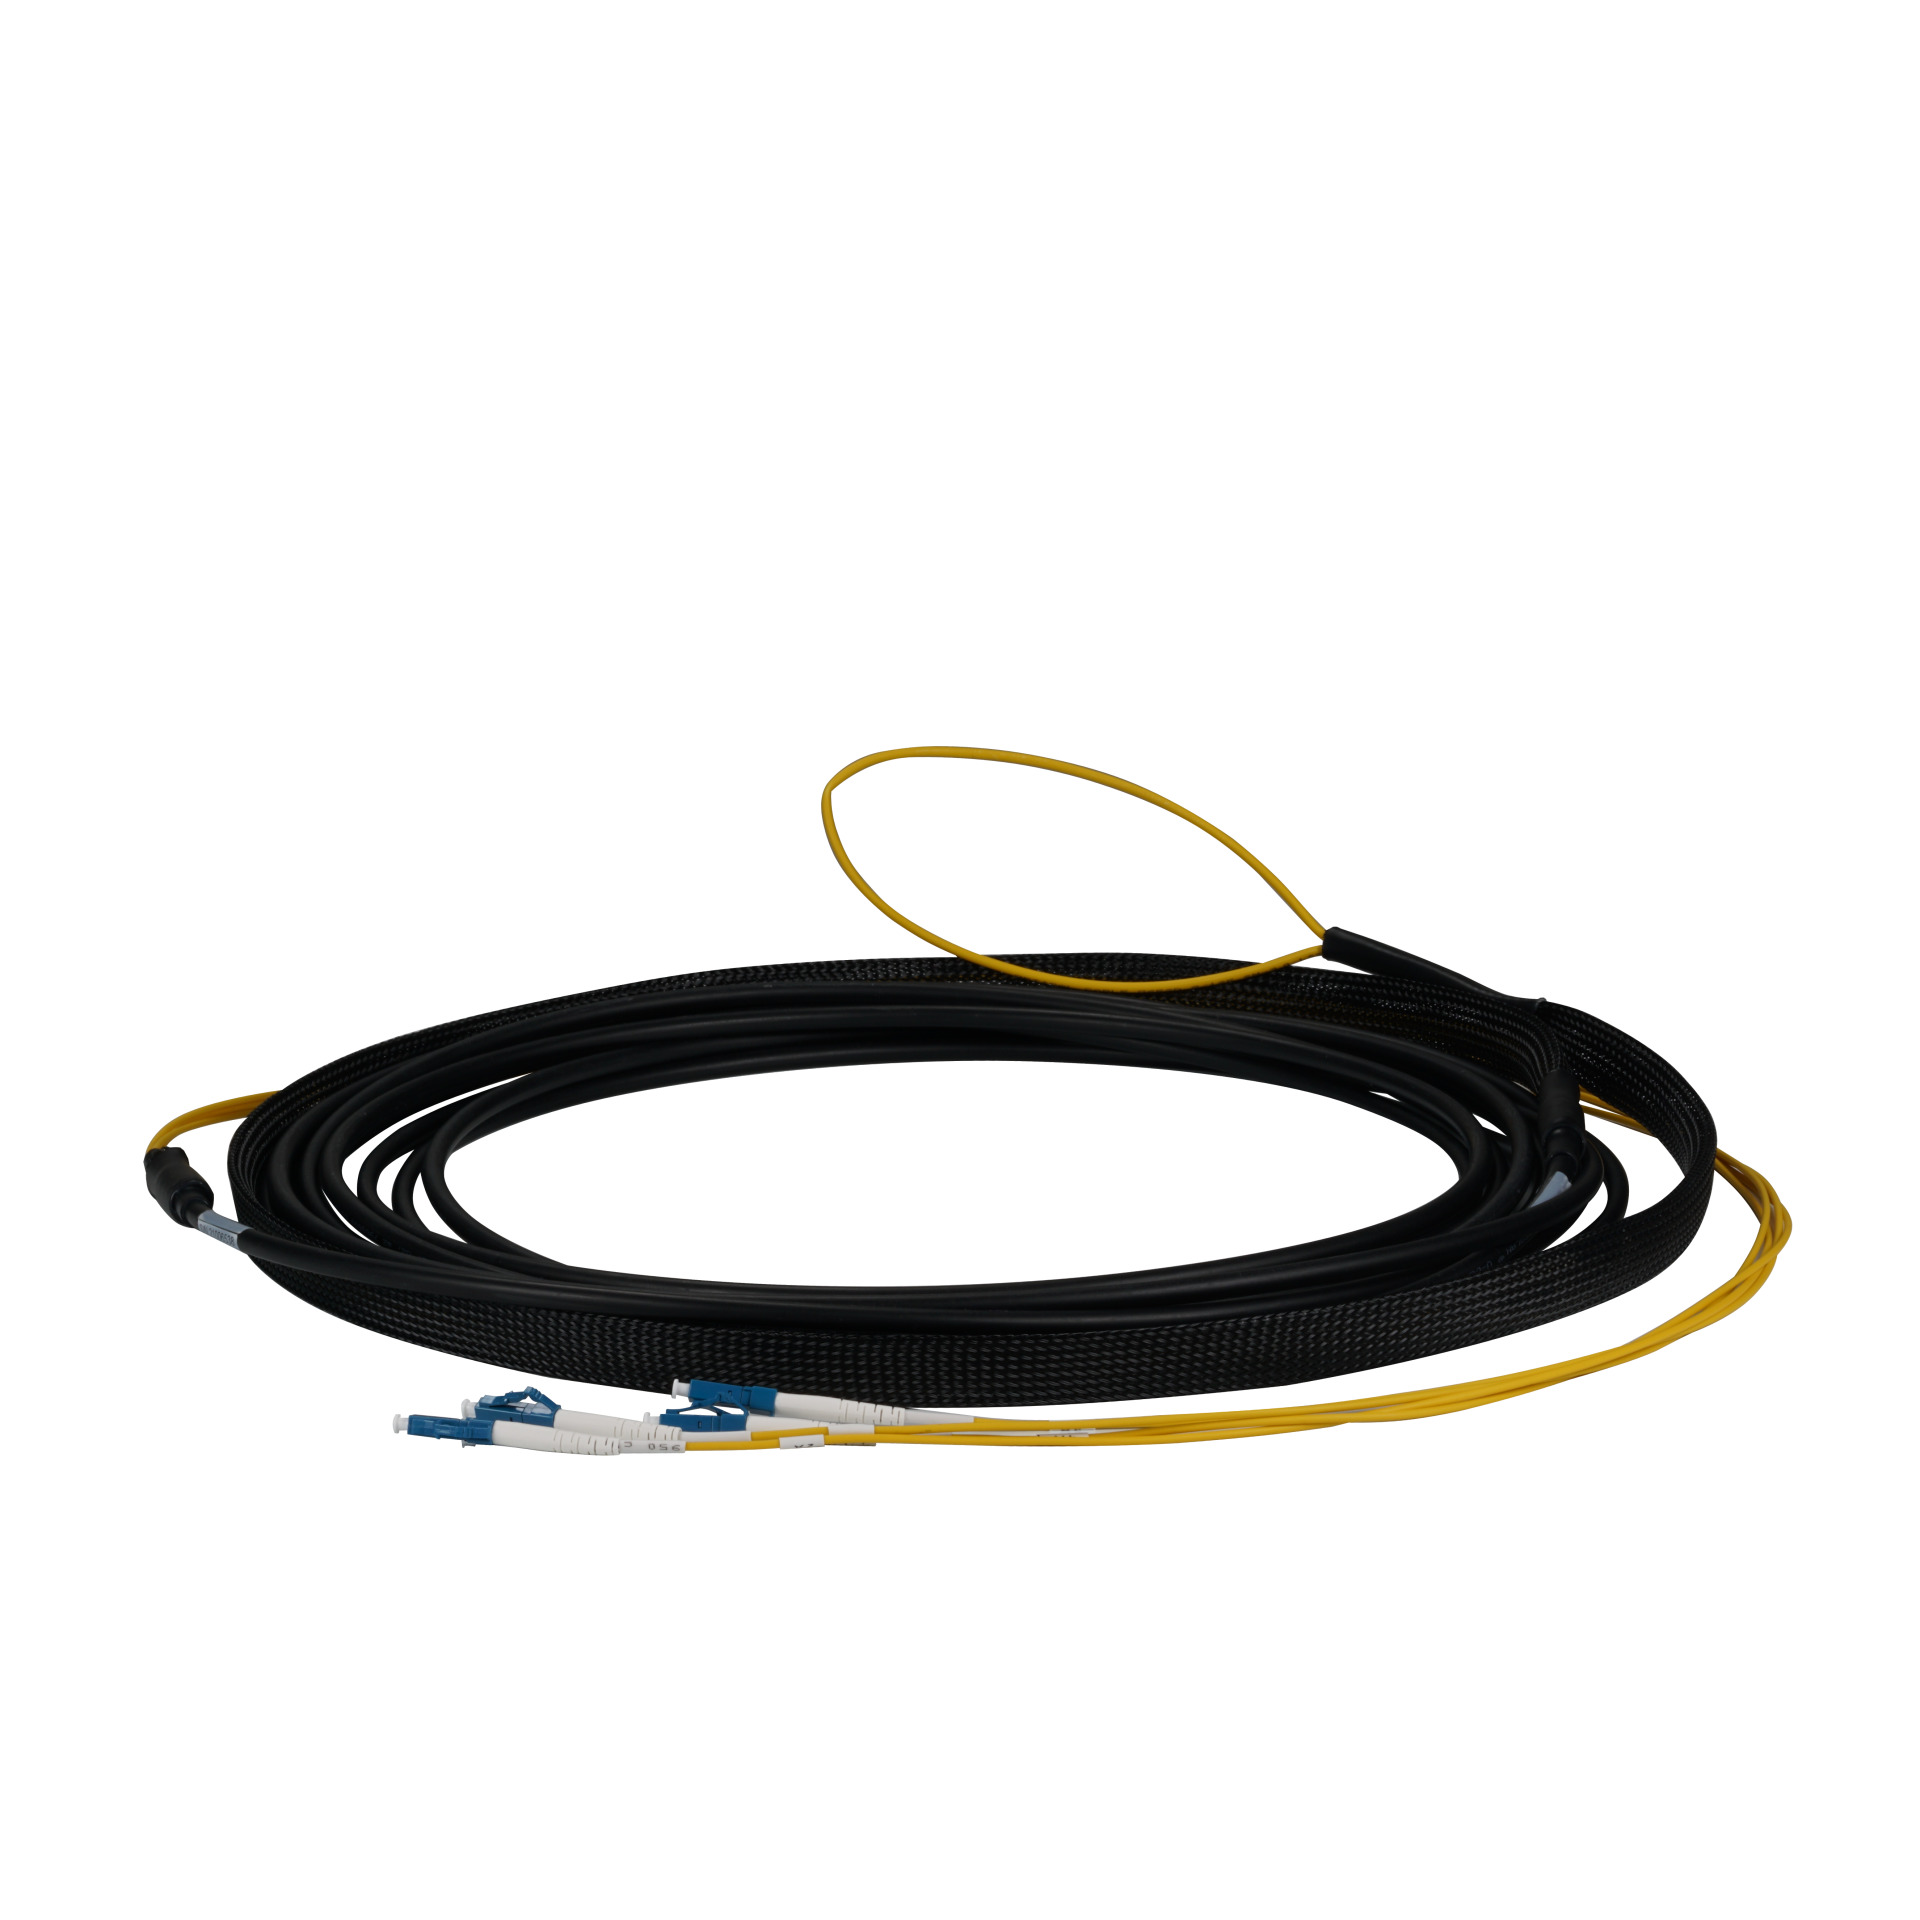 Trunk cable U-DQ(ZN)BH 12E 9/125, LC/LC OS2 180m